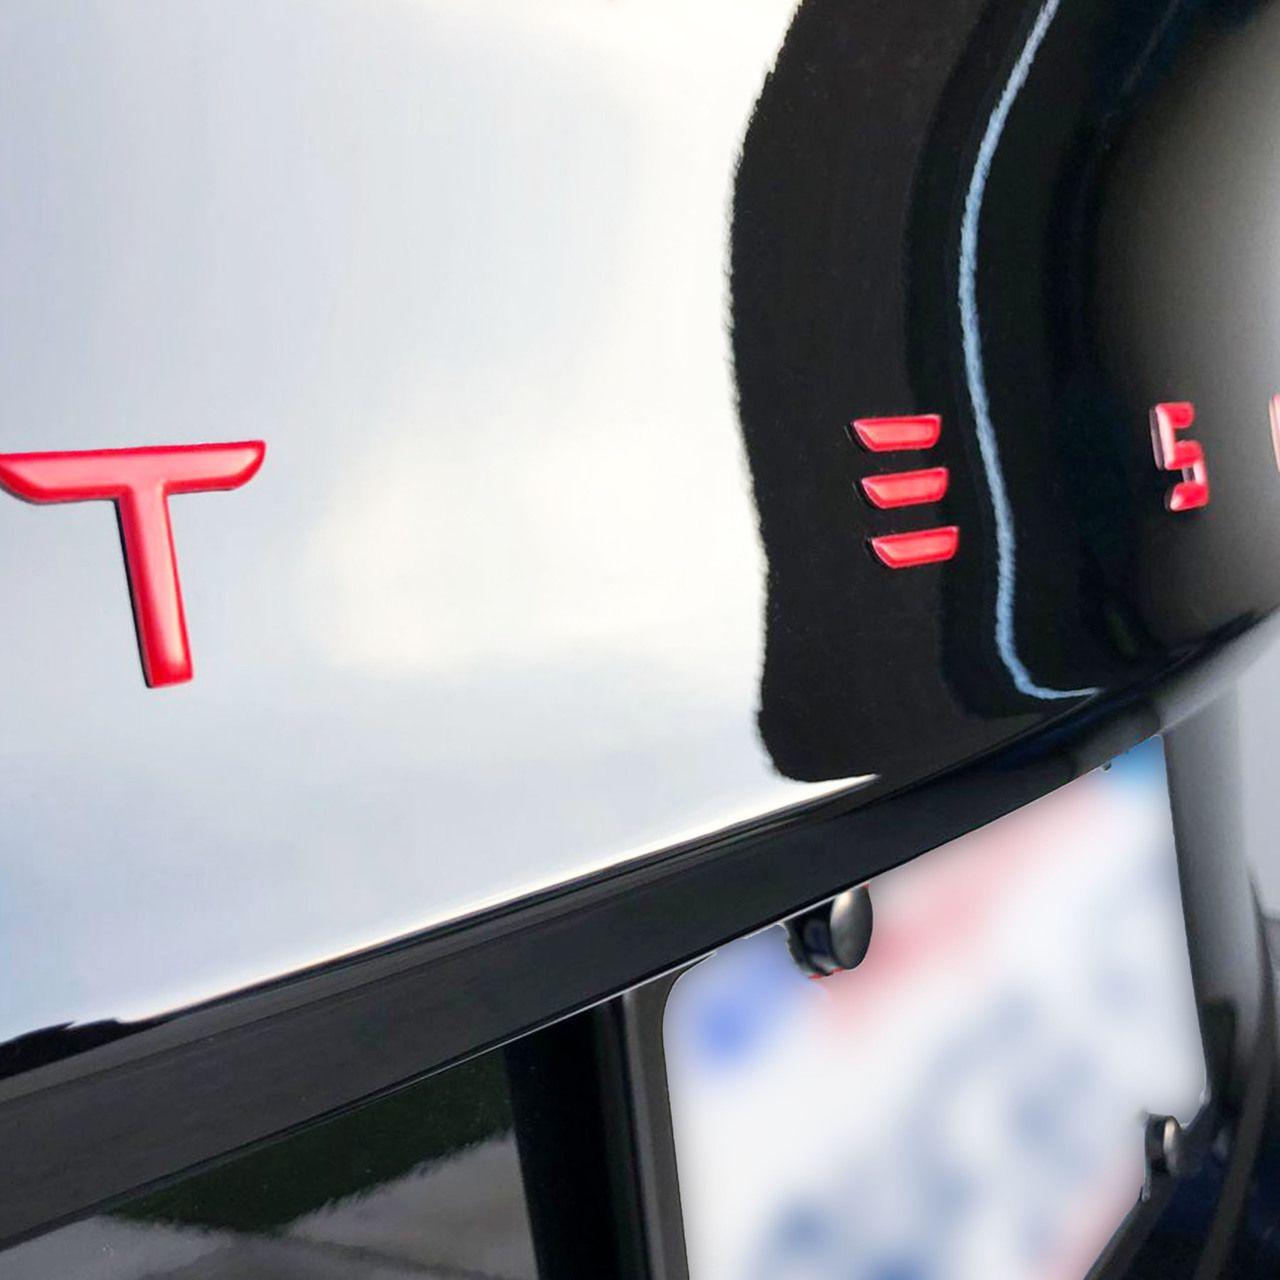 Black and Red C Logo - Tesla Performance Emblem - Abstract Ocean